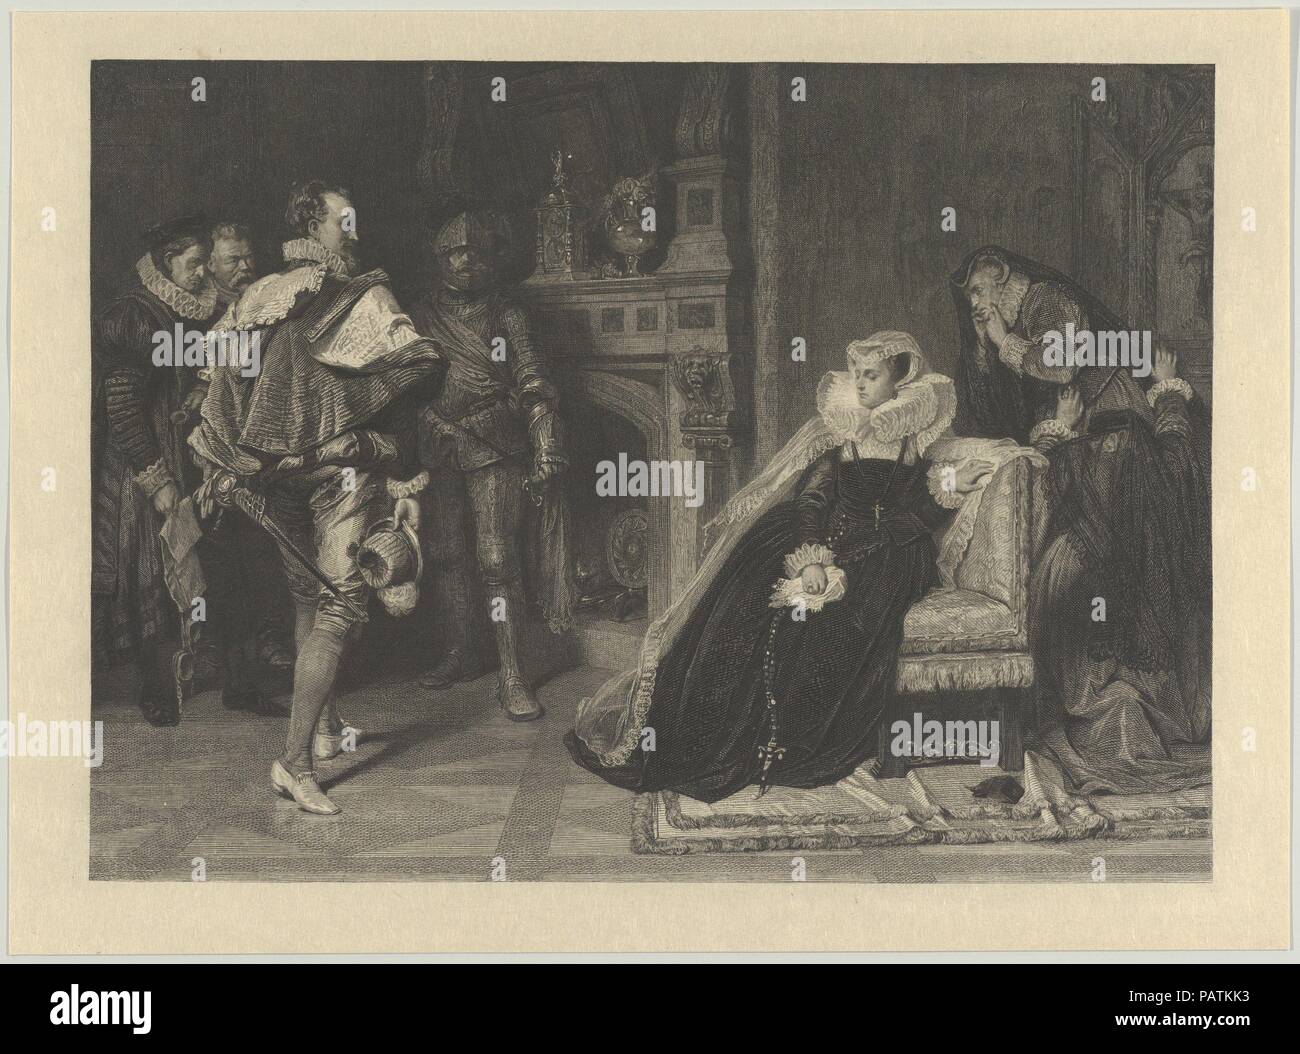 Mary Stuart Listening to the Order of Her Execution. Artist: After Karl Theodor von Piloty (German, Munich 1826-1886 Ambach bei Munich). Dimensions: Image: 7 7/8 × 10 13/16 in. (20 × 27.4 cm)  Sheet: 9 1/8 × 12 3/8 in. (23.2 × 31.5 cm). Engraver: Doris Raab (German, Nuremburg 1851-before 1933). Publisher: Probably published by D. Appleton & Co. (New York, NY). Subject: Mary, Queen of Scots (Linlithgow 1542-1587 Fotheringhay, England). Date: 1878 (?).  This is likely a state before letters of a print published as the frontispiece for Appleton and Co.'s New York 'Art Journal' in 1878. In the per Stock Photo